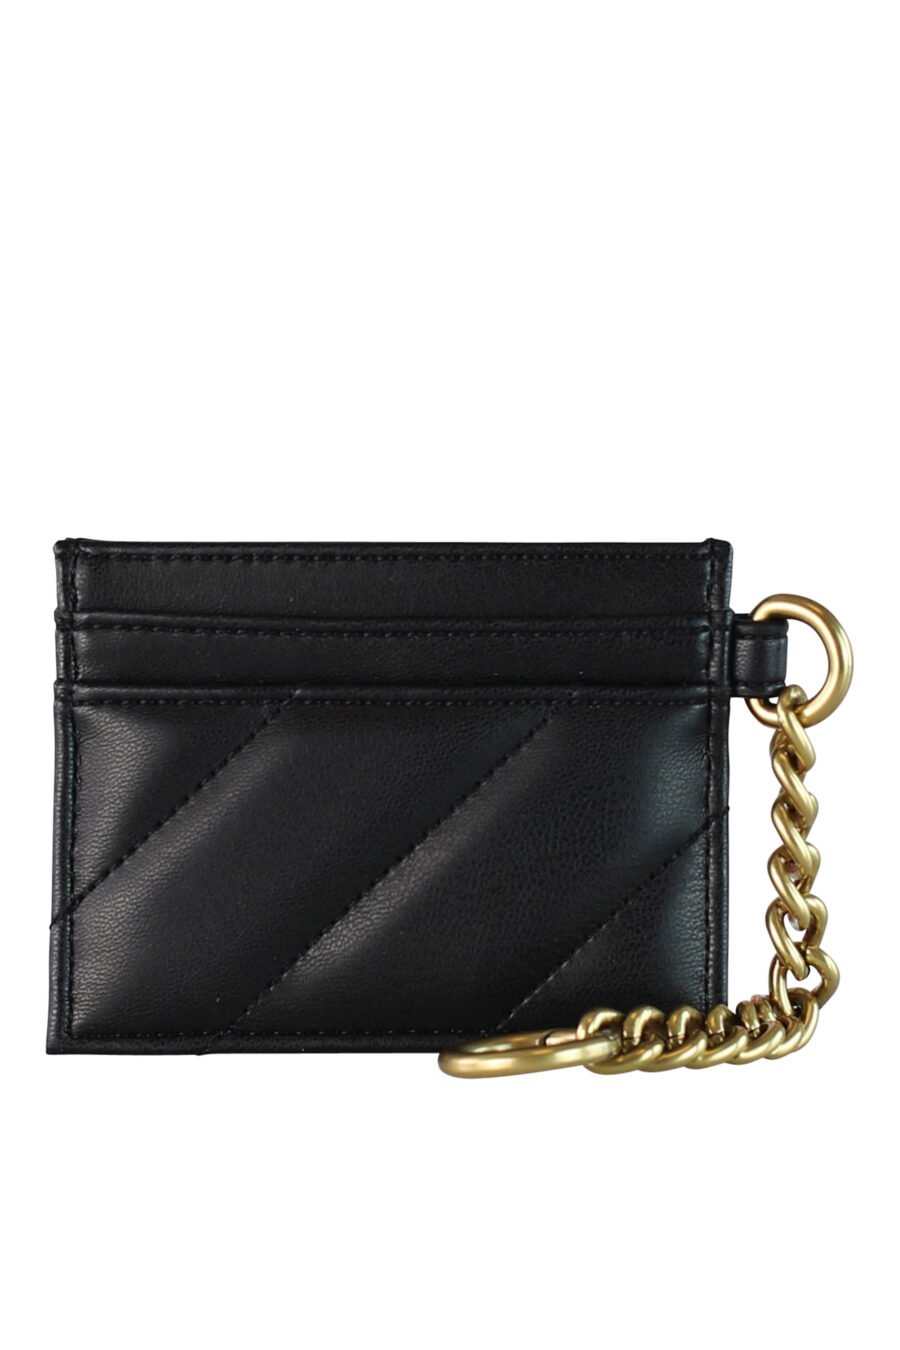 Black card holder with chain and gold logo - IMG 0496